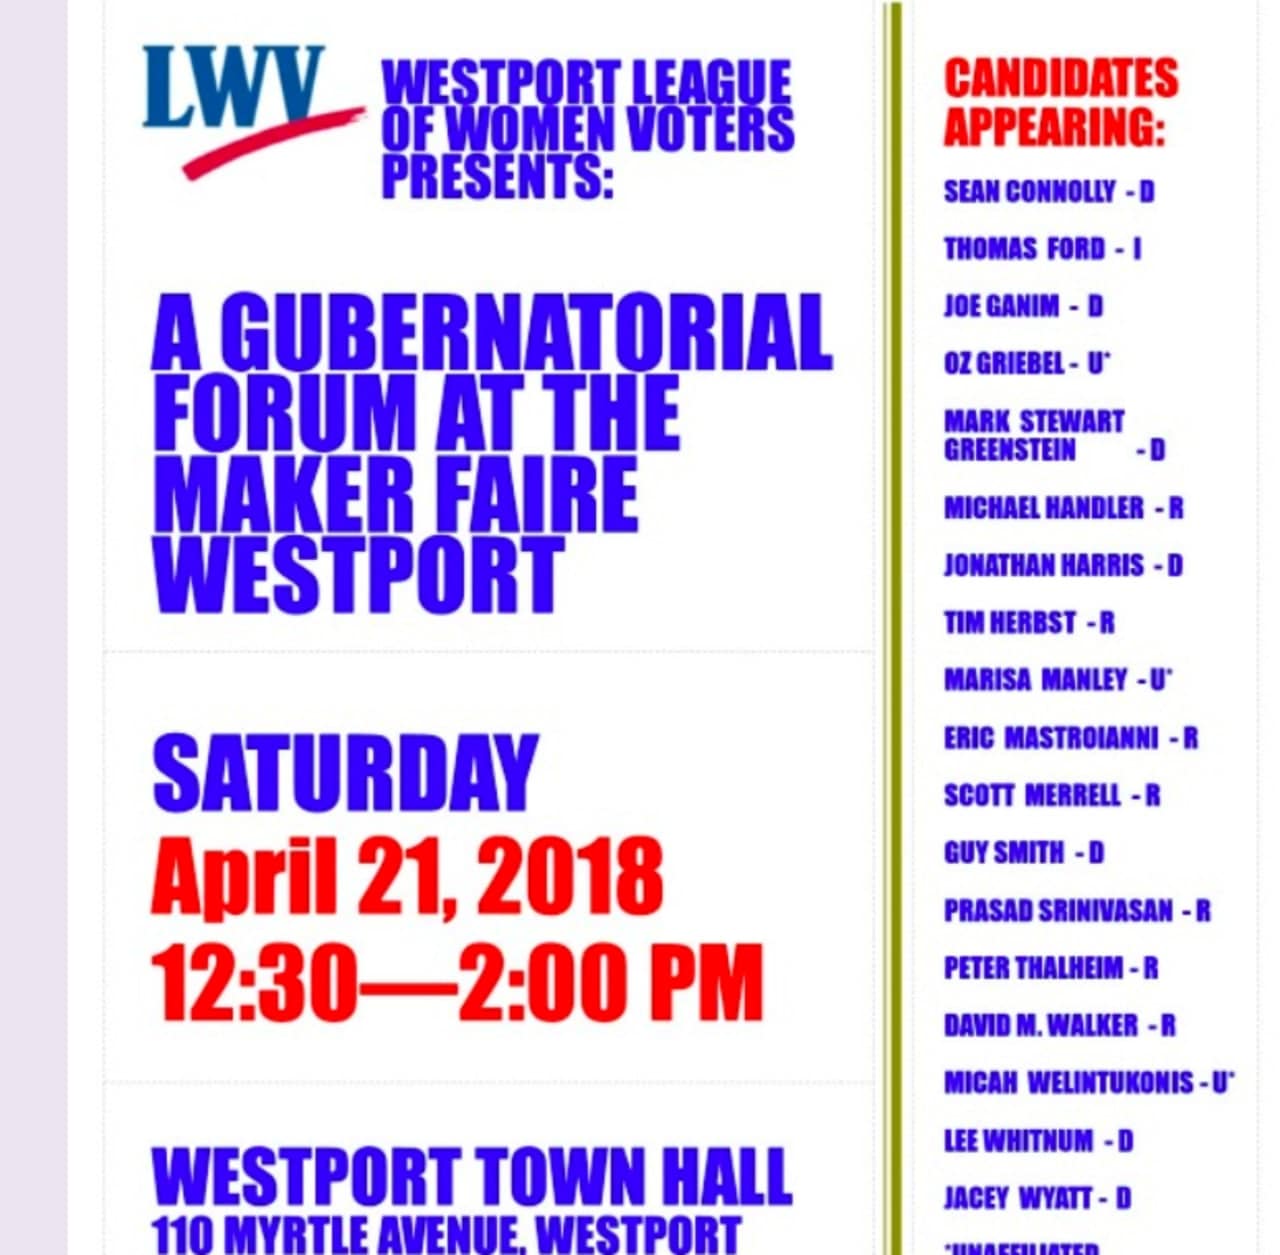 A total of 18 candidates are invited to Saturday's League of Women Voter's gubernatorial forum in Westport.